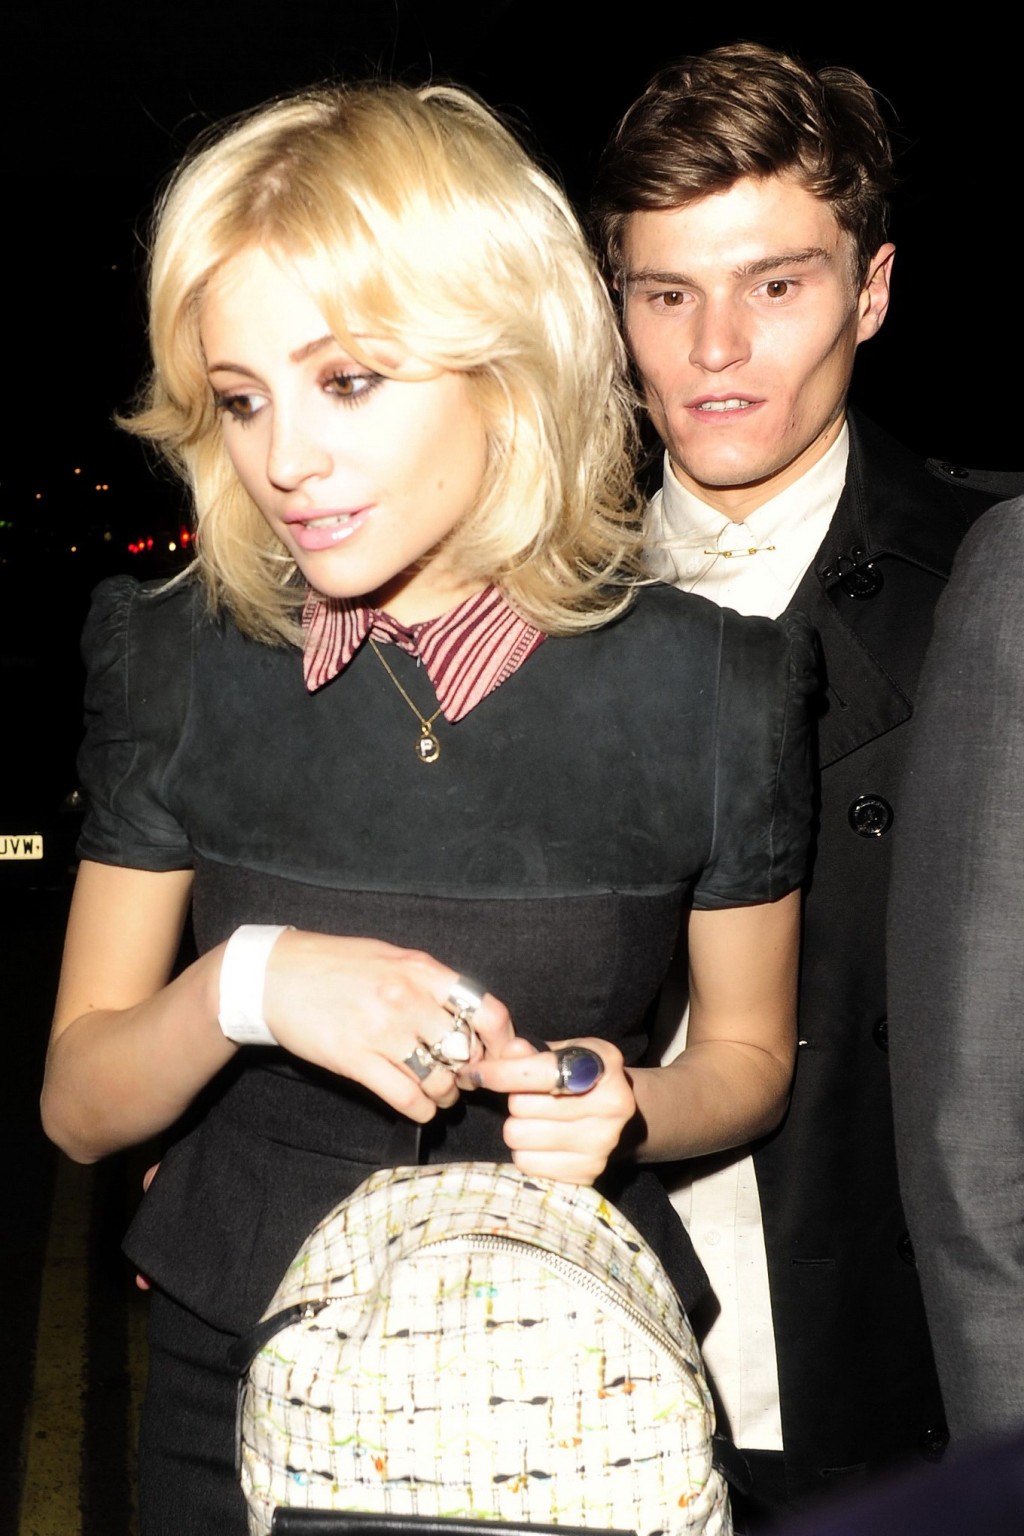 Pixie Lott flashing her panties outside the Rose Club in London #75265462